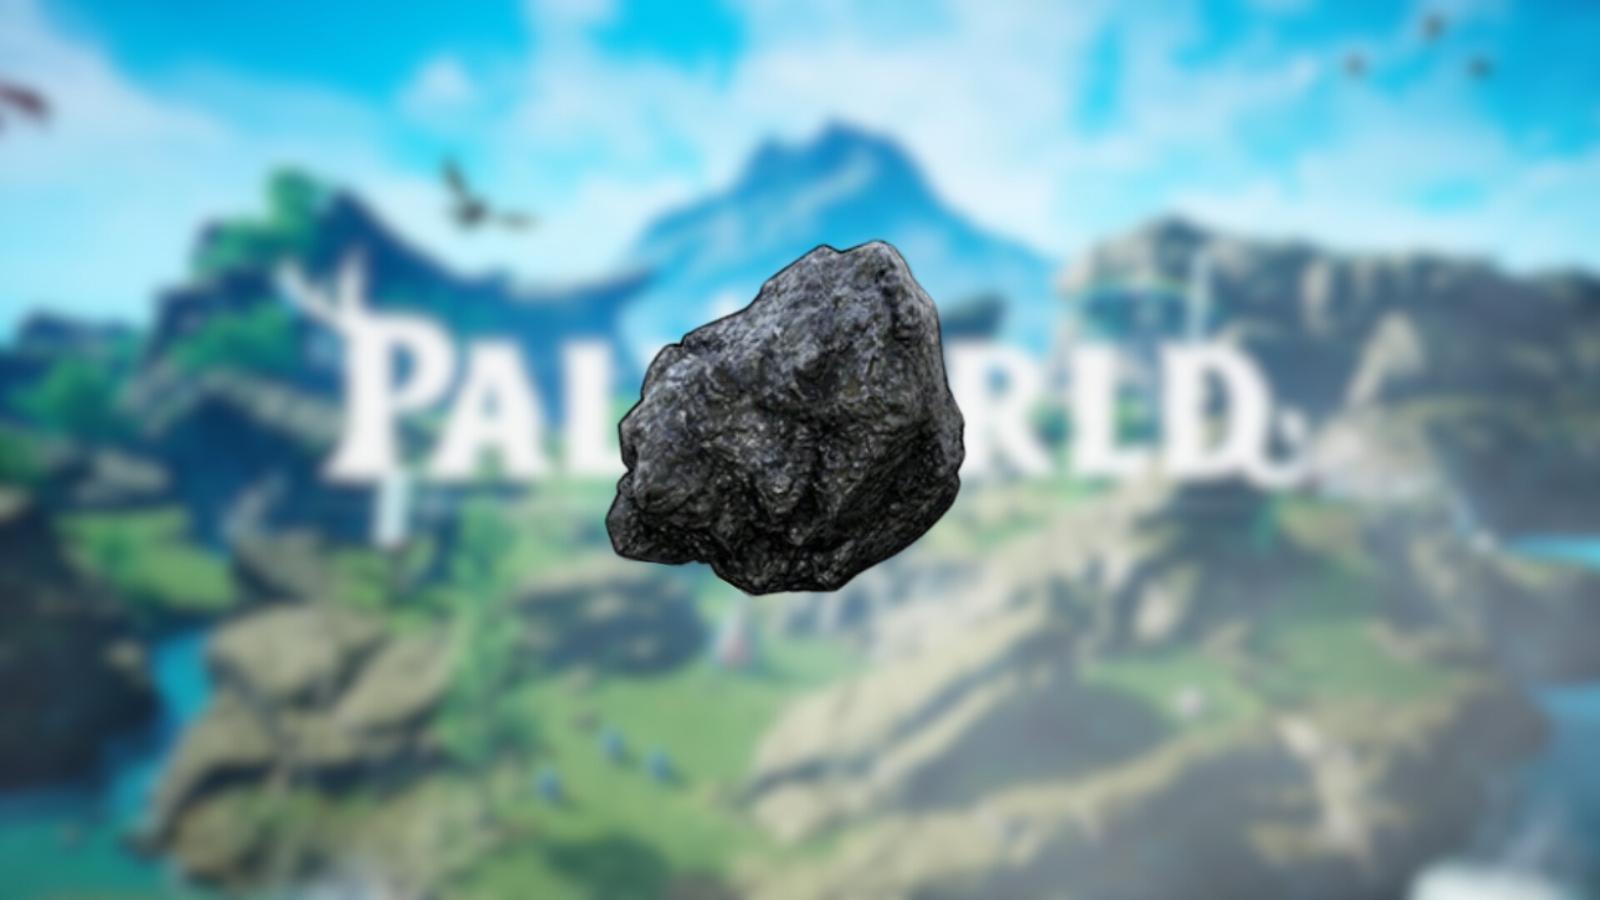 Palworld How to Get Coal Location and Farming